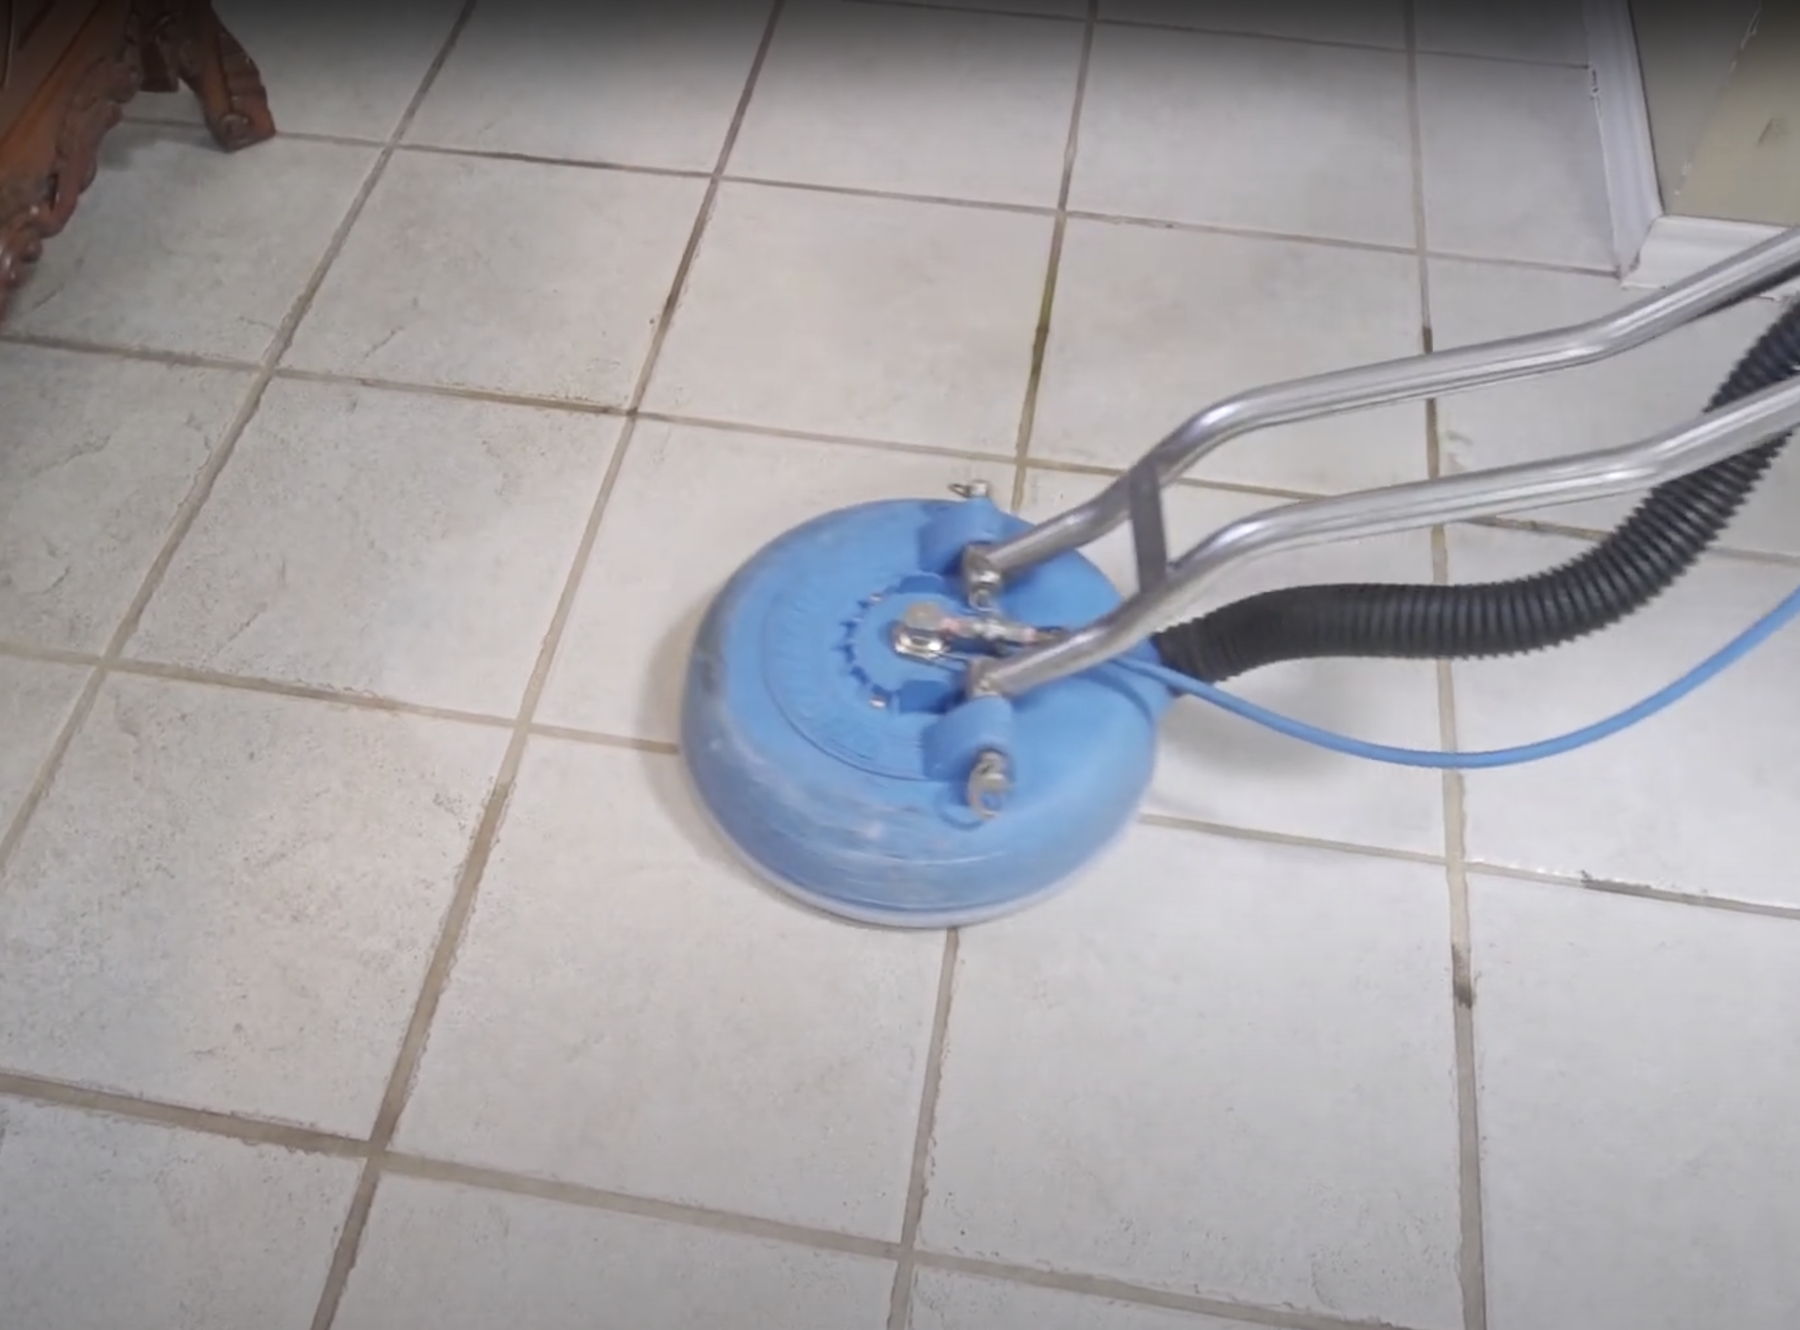 Tile & Grout Cleaning in Plano and Frisco Texas